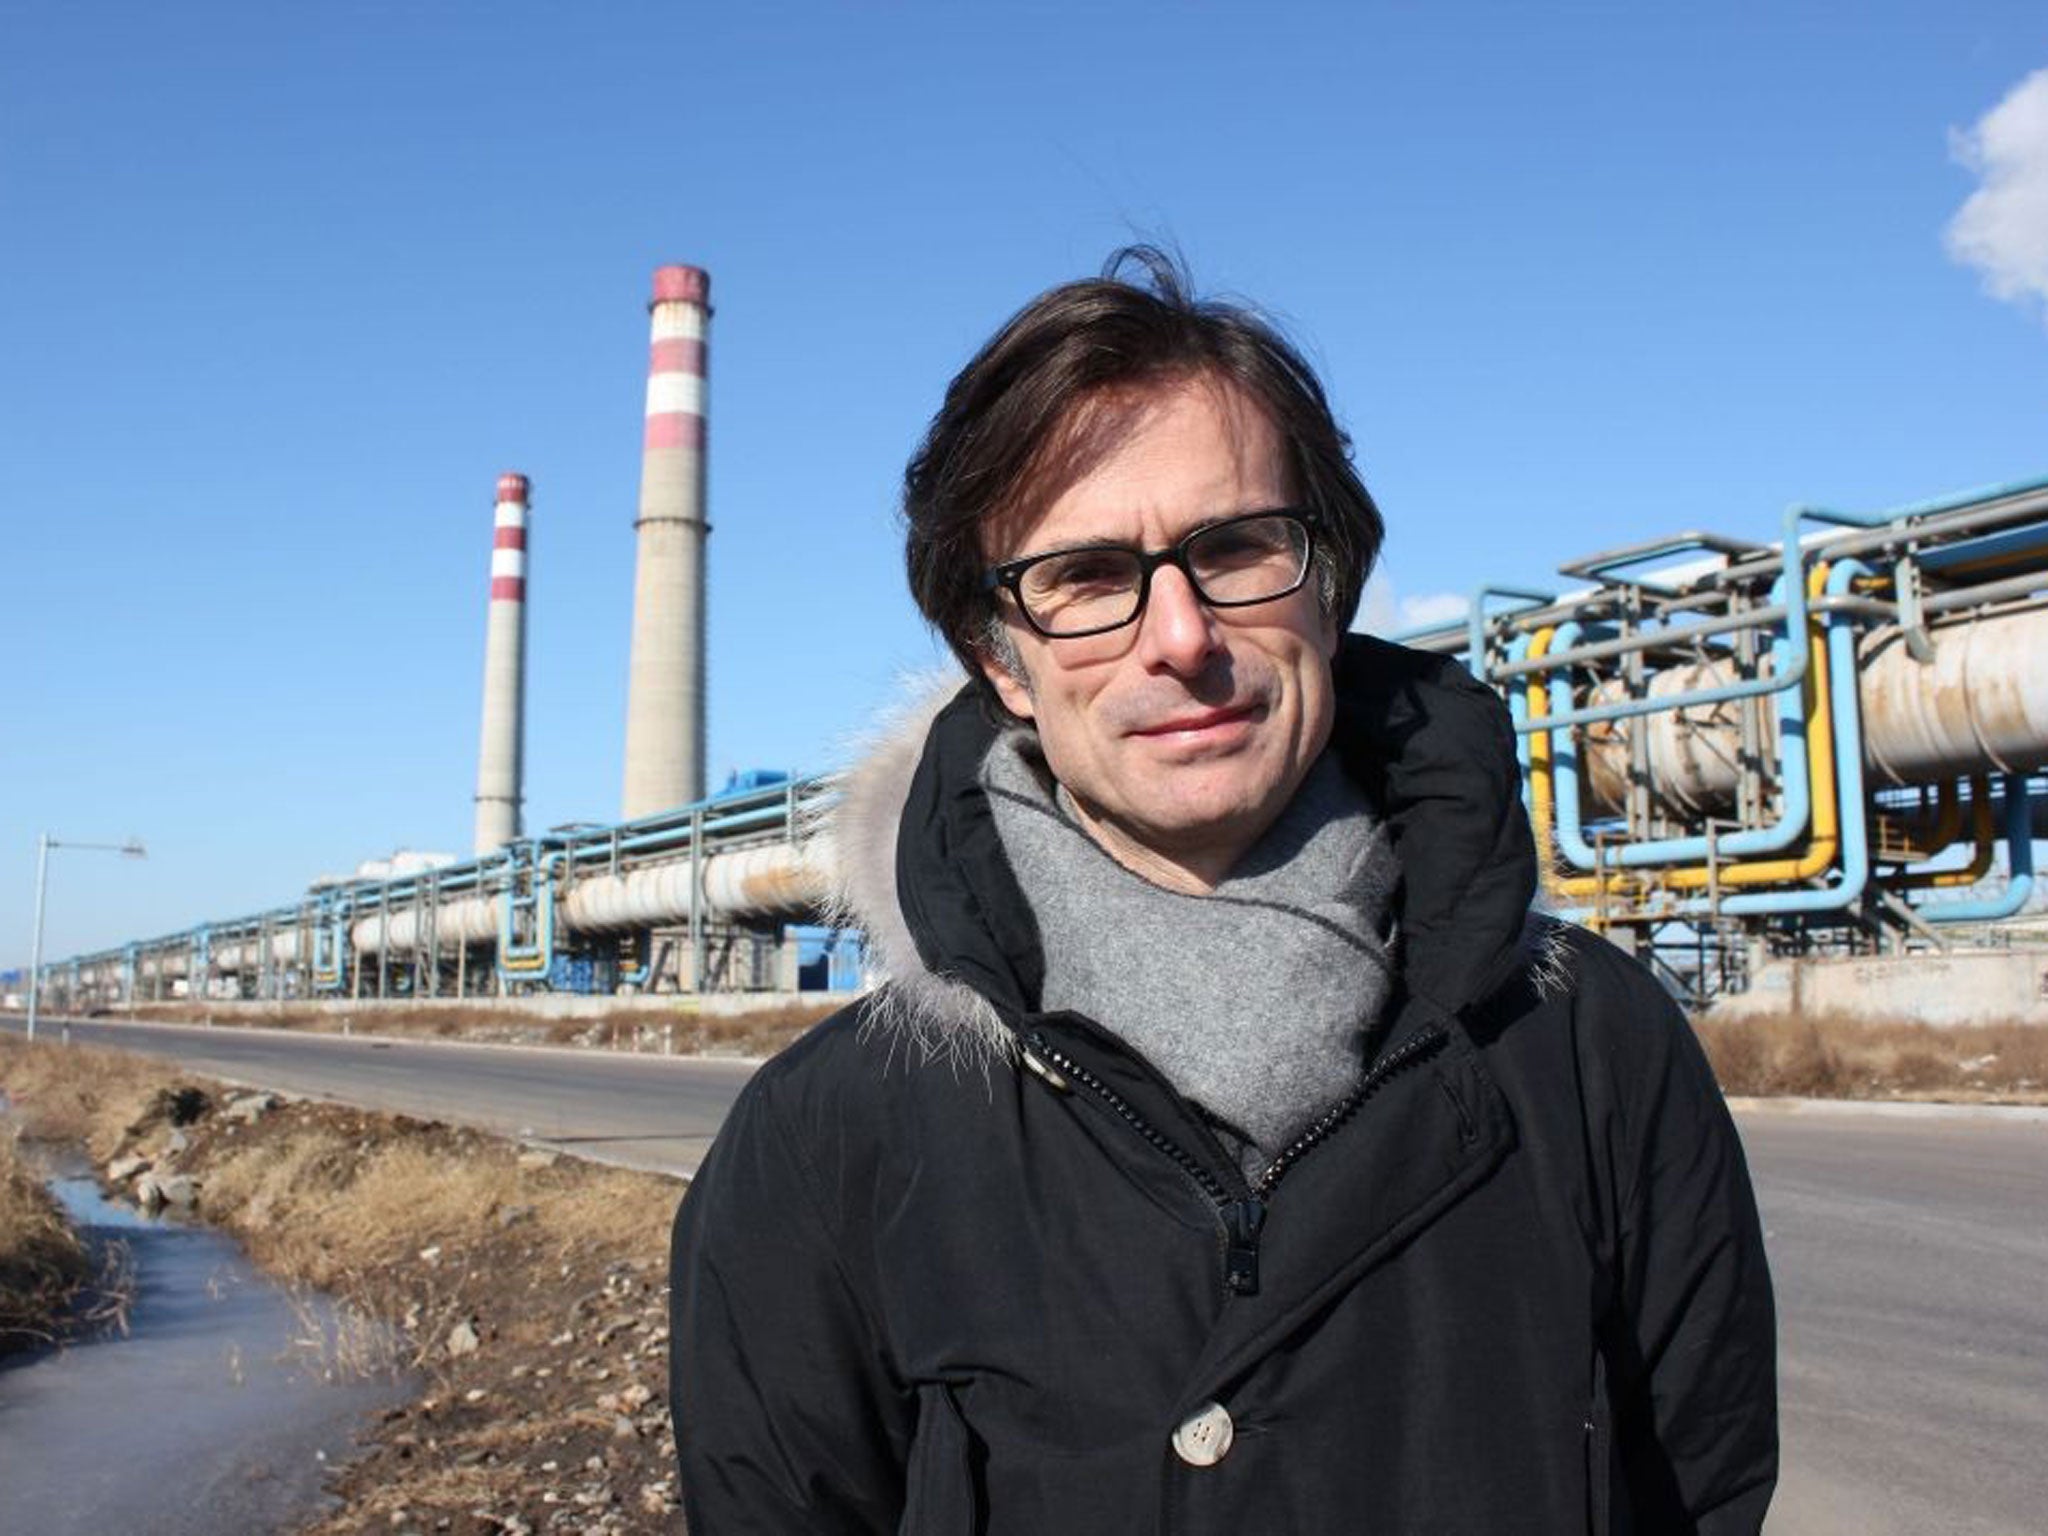 Peston visited a major state steel manufacturer in China